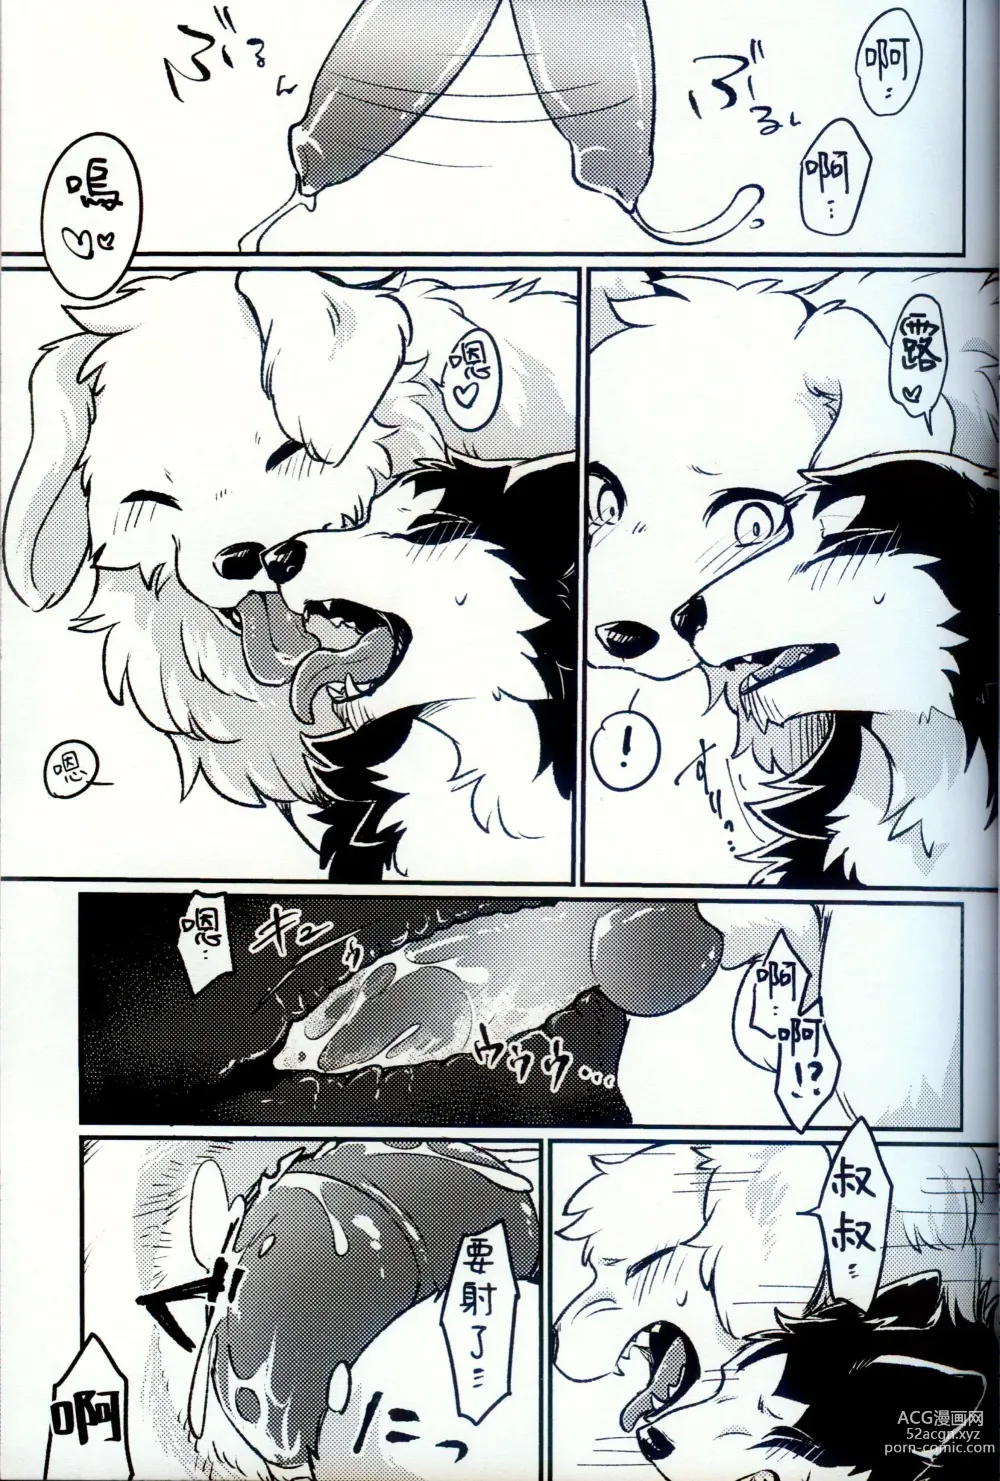 Page 12 of doujinshi More,more,MORE! (decensored)